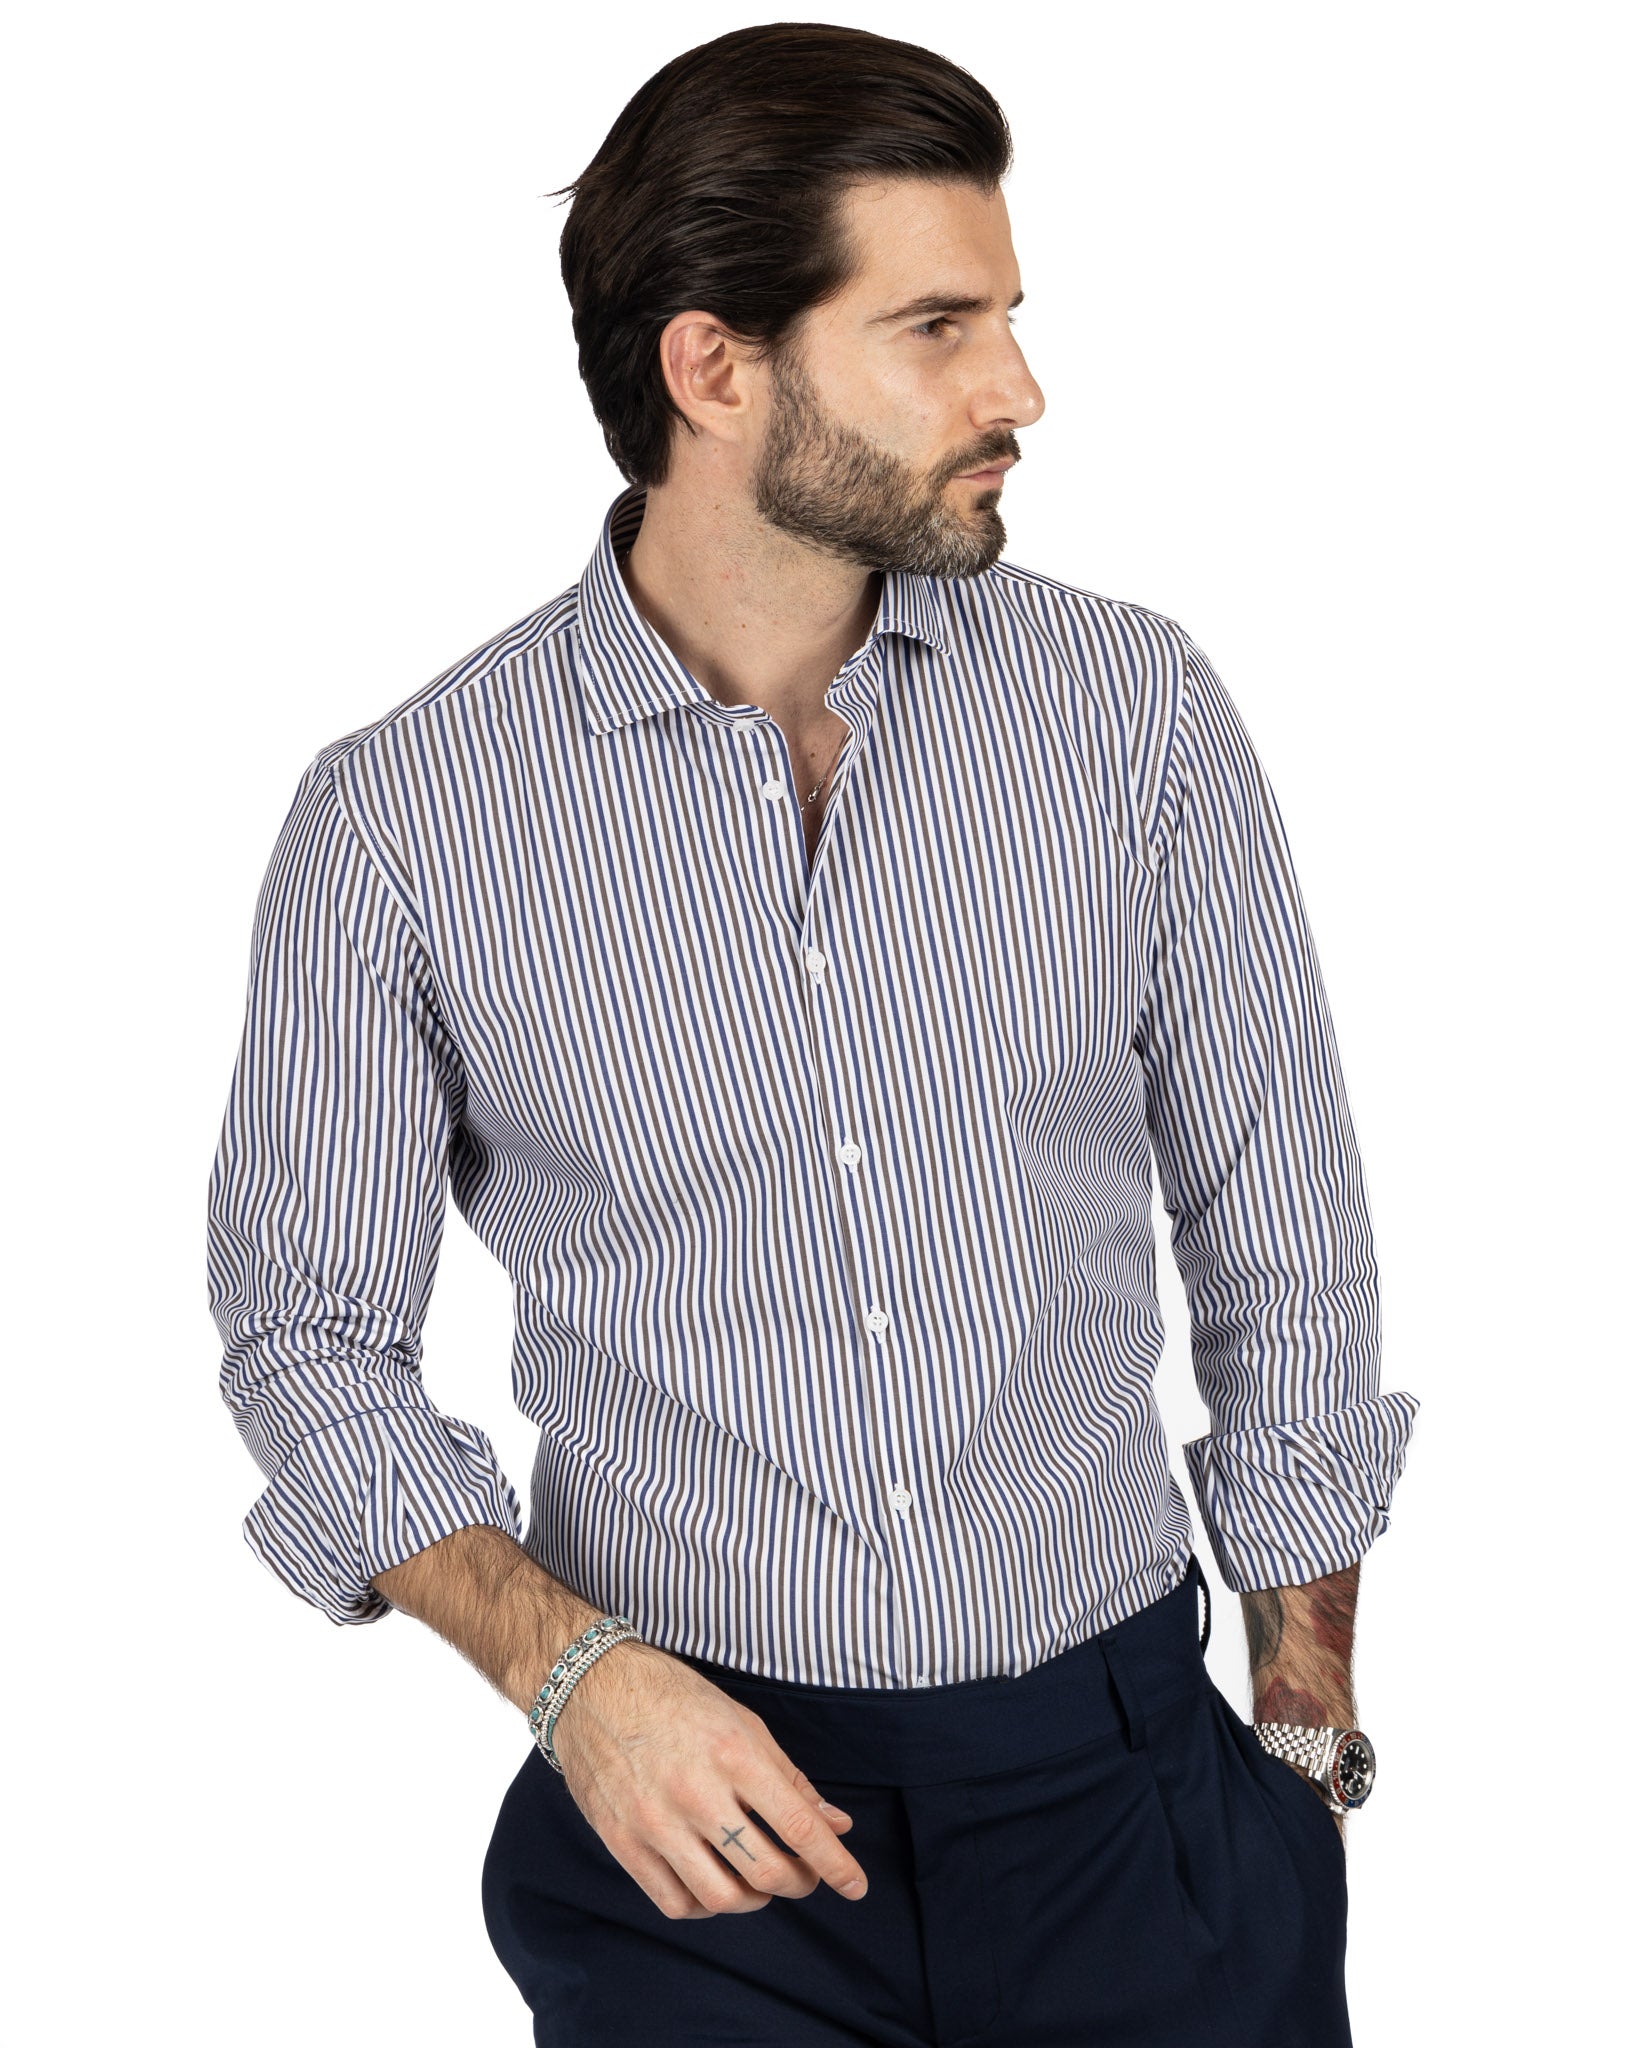 Shirt - slim fit brown and blue stripes